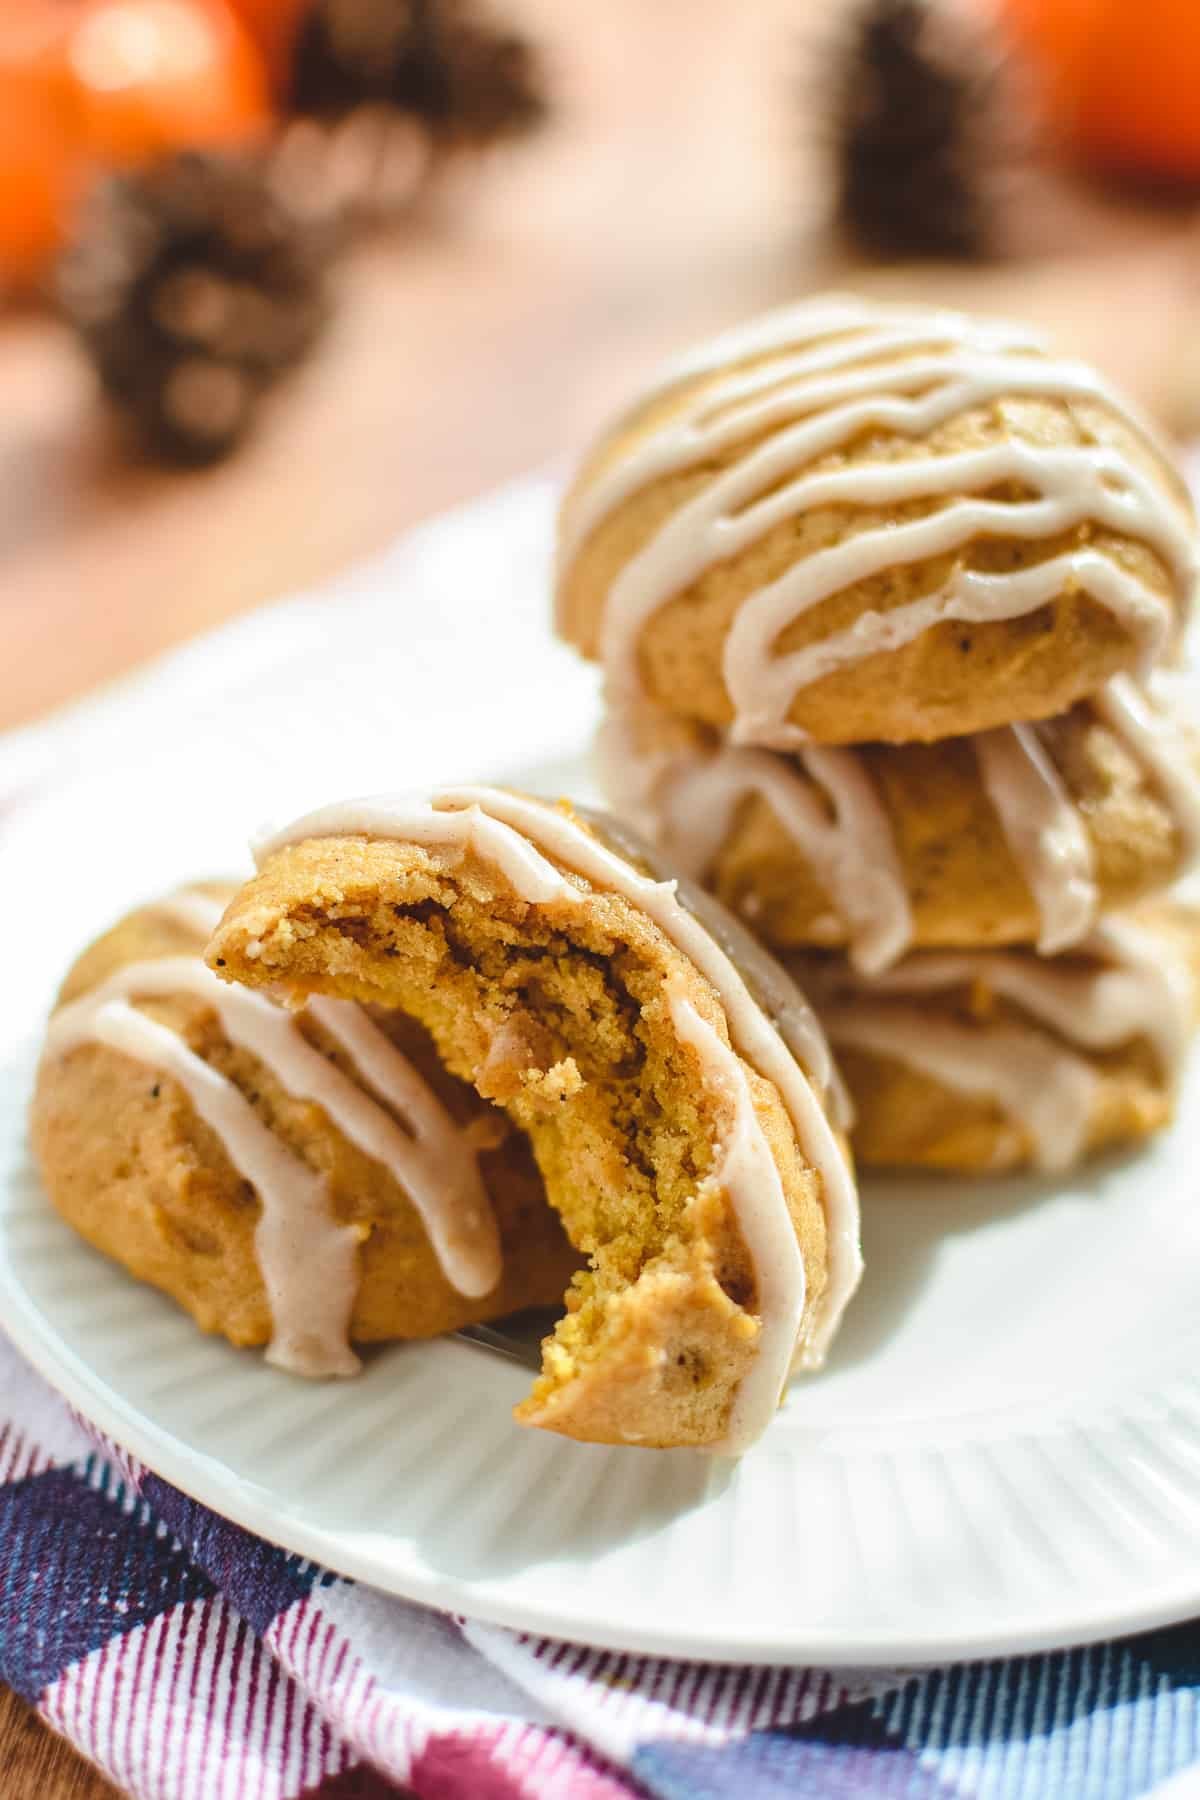 Stacks of pumpkin cookies with a bite taken out of one.